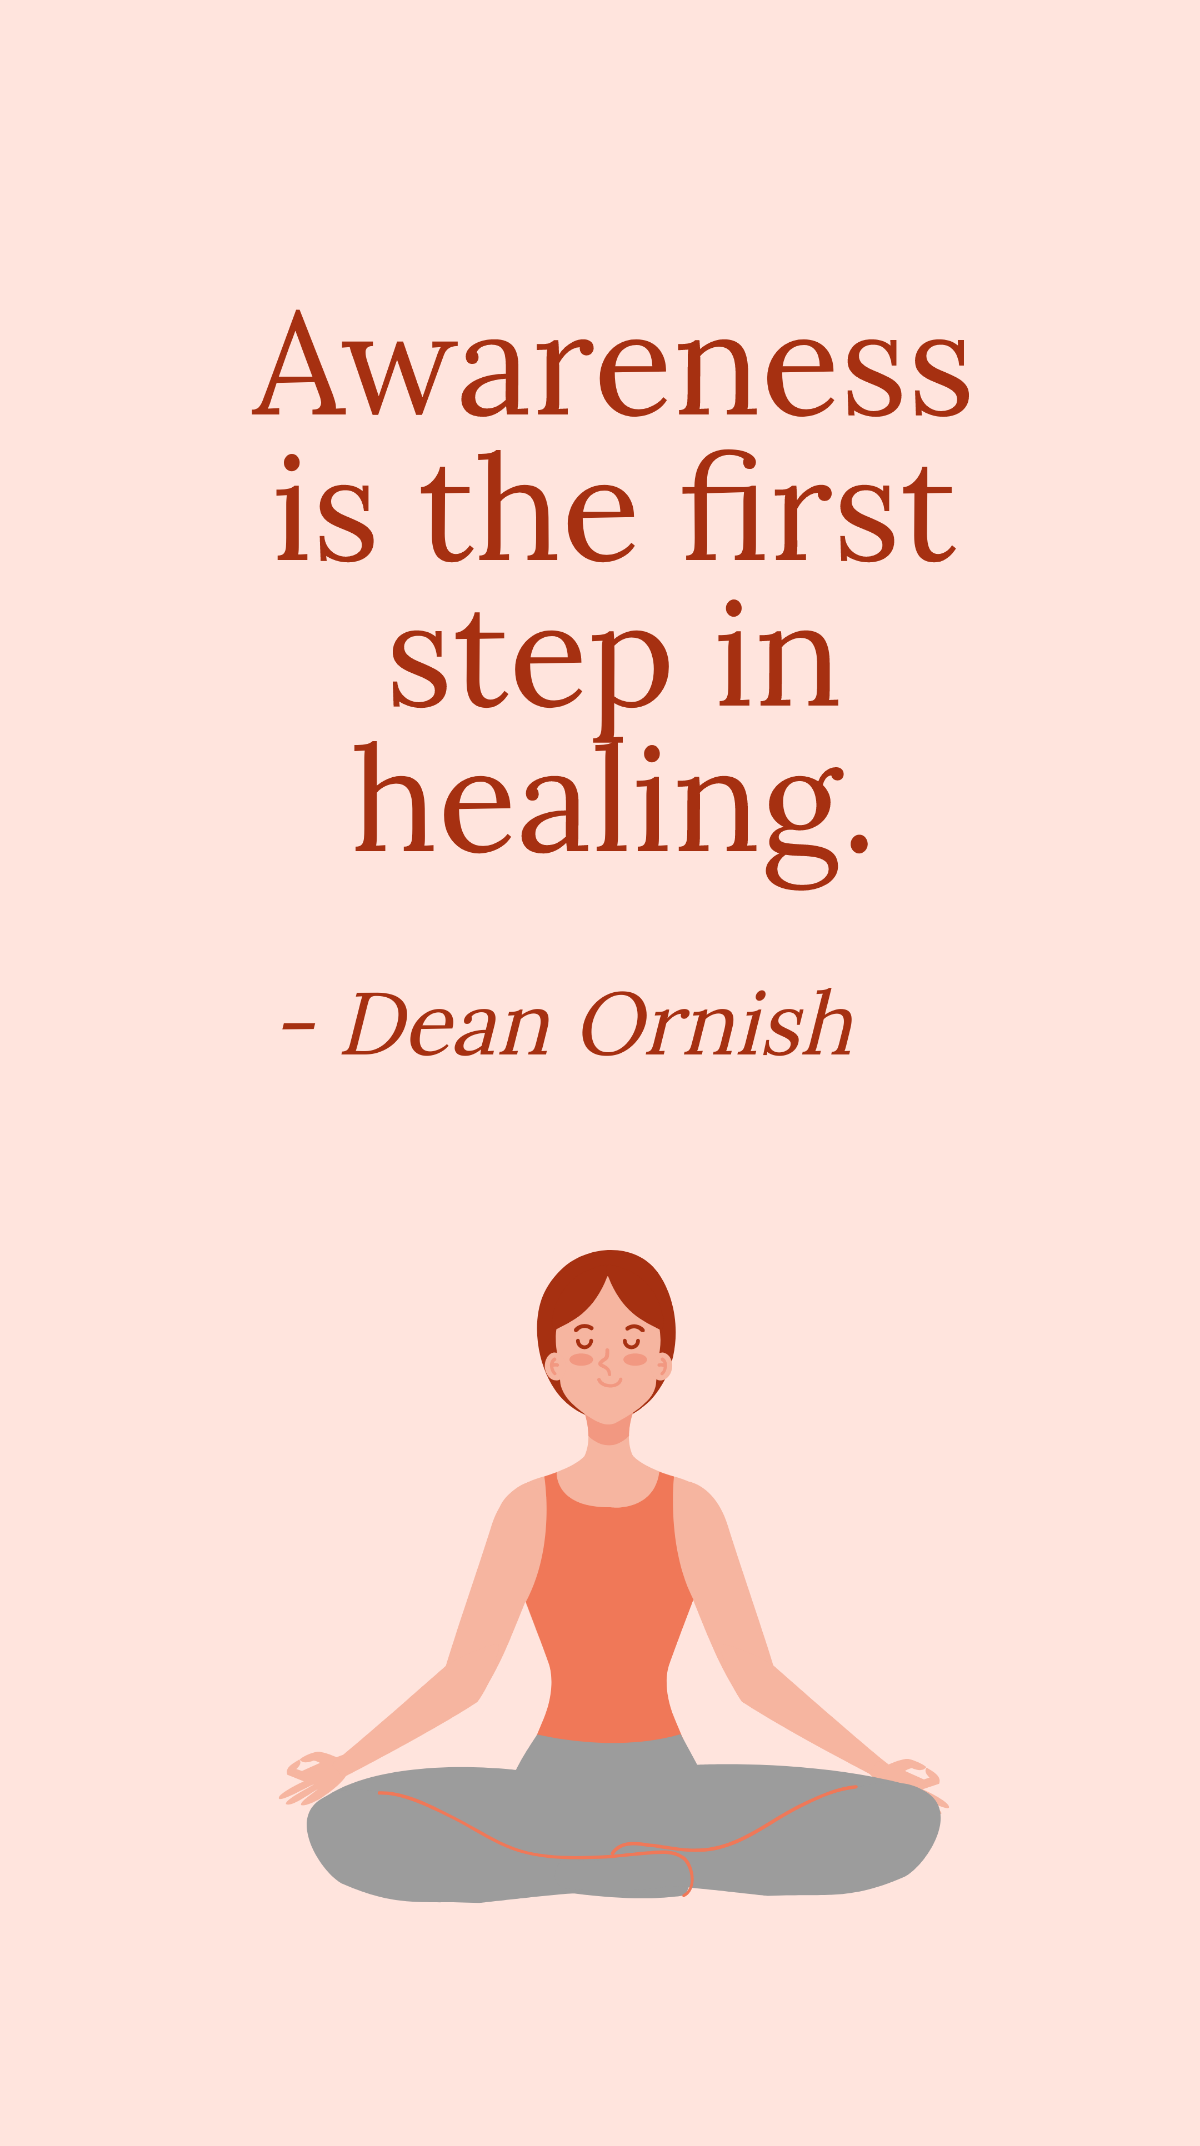 Dean Ornish - Awareness is the first step in healing.